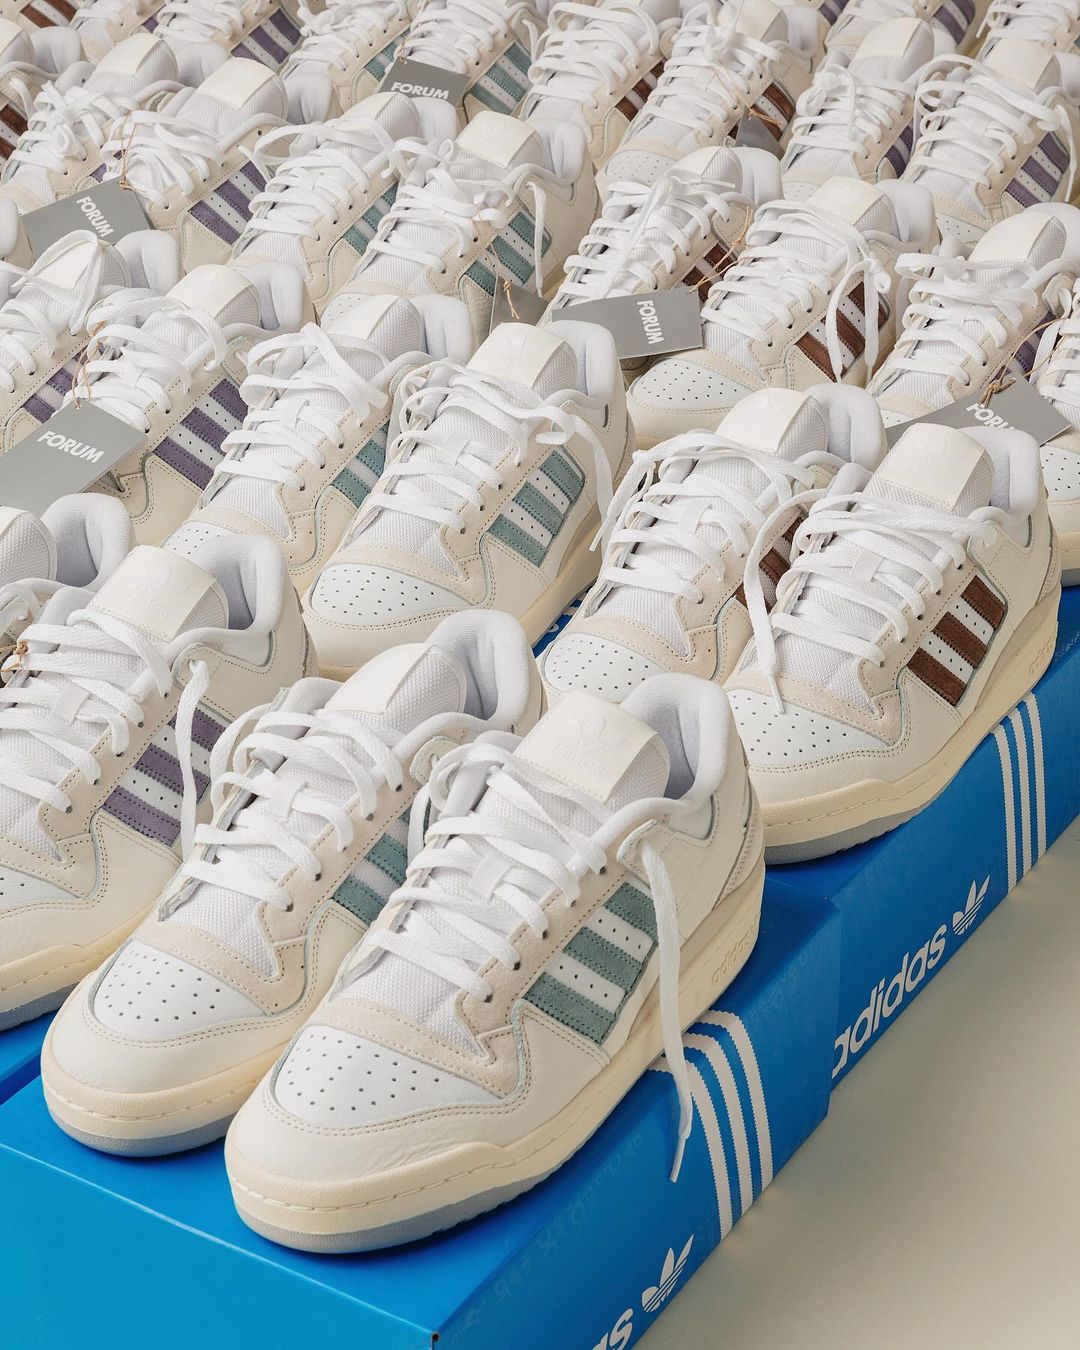 Packer Shoes x adidas Forum Low Pack